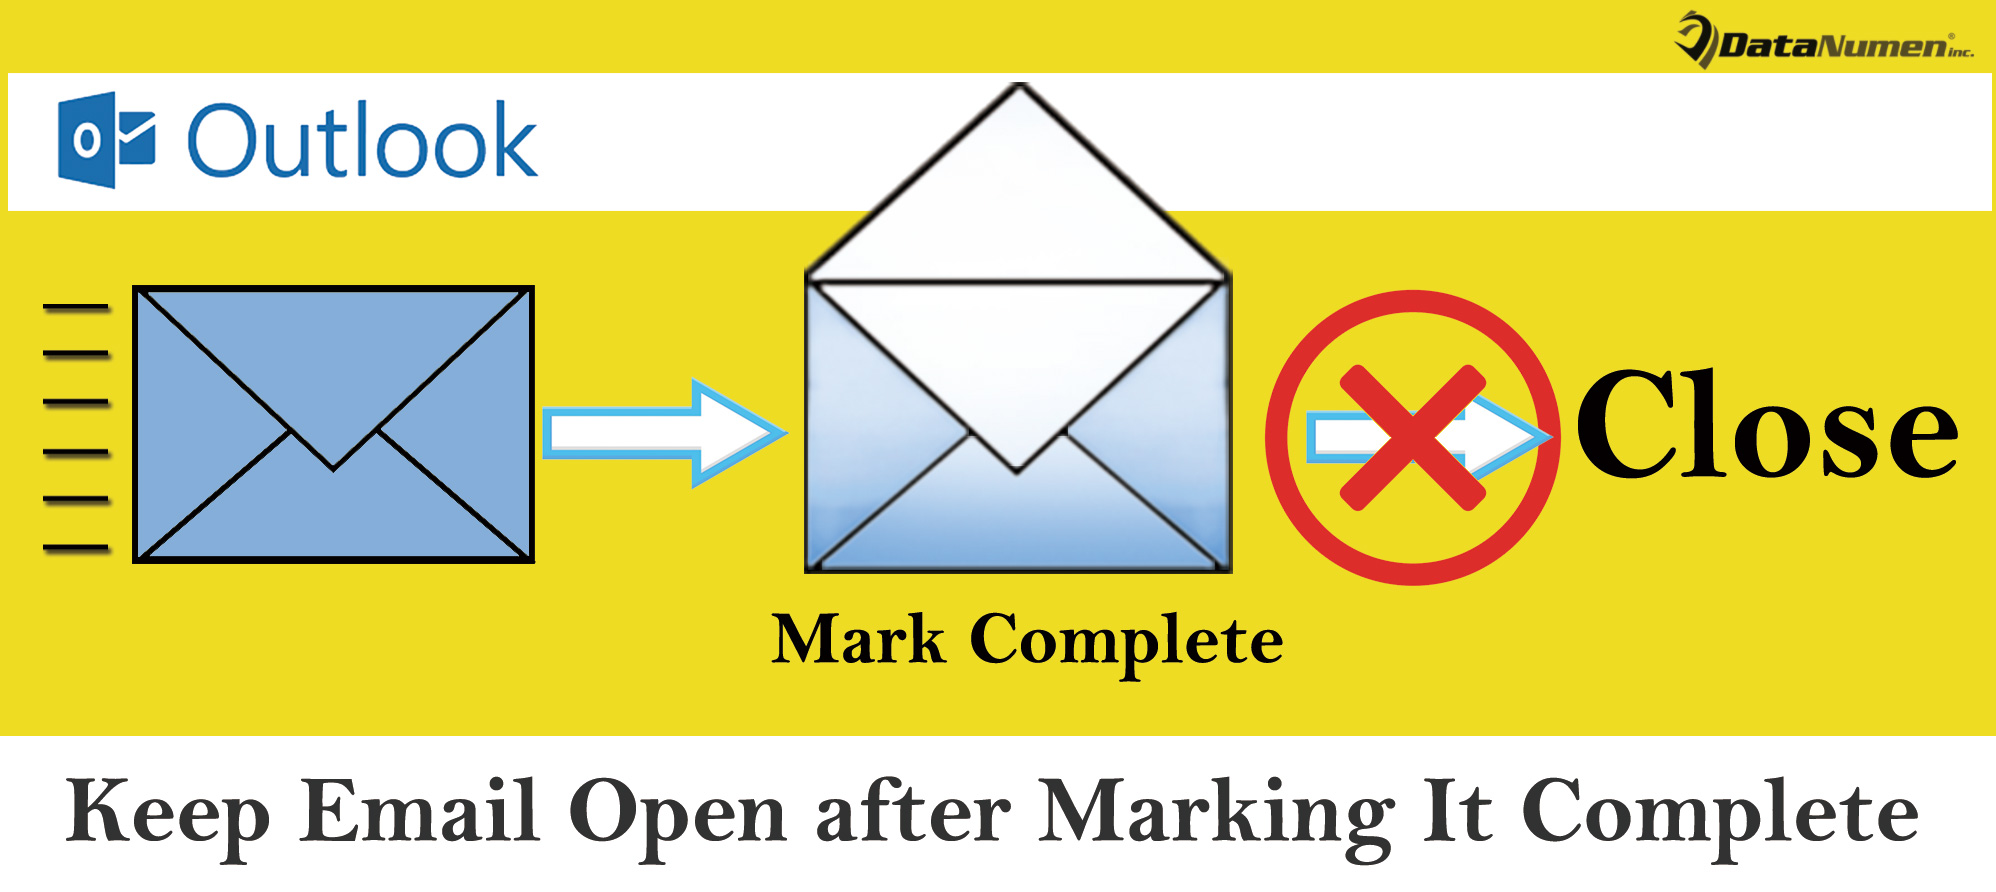 Keep an Email Open after Marking It Complete in Your Outlook